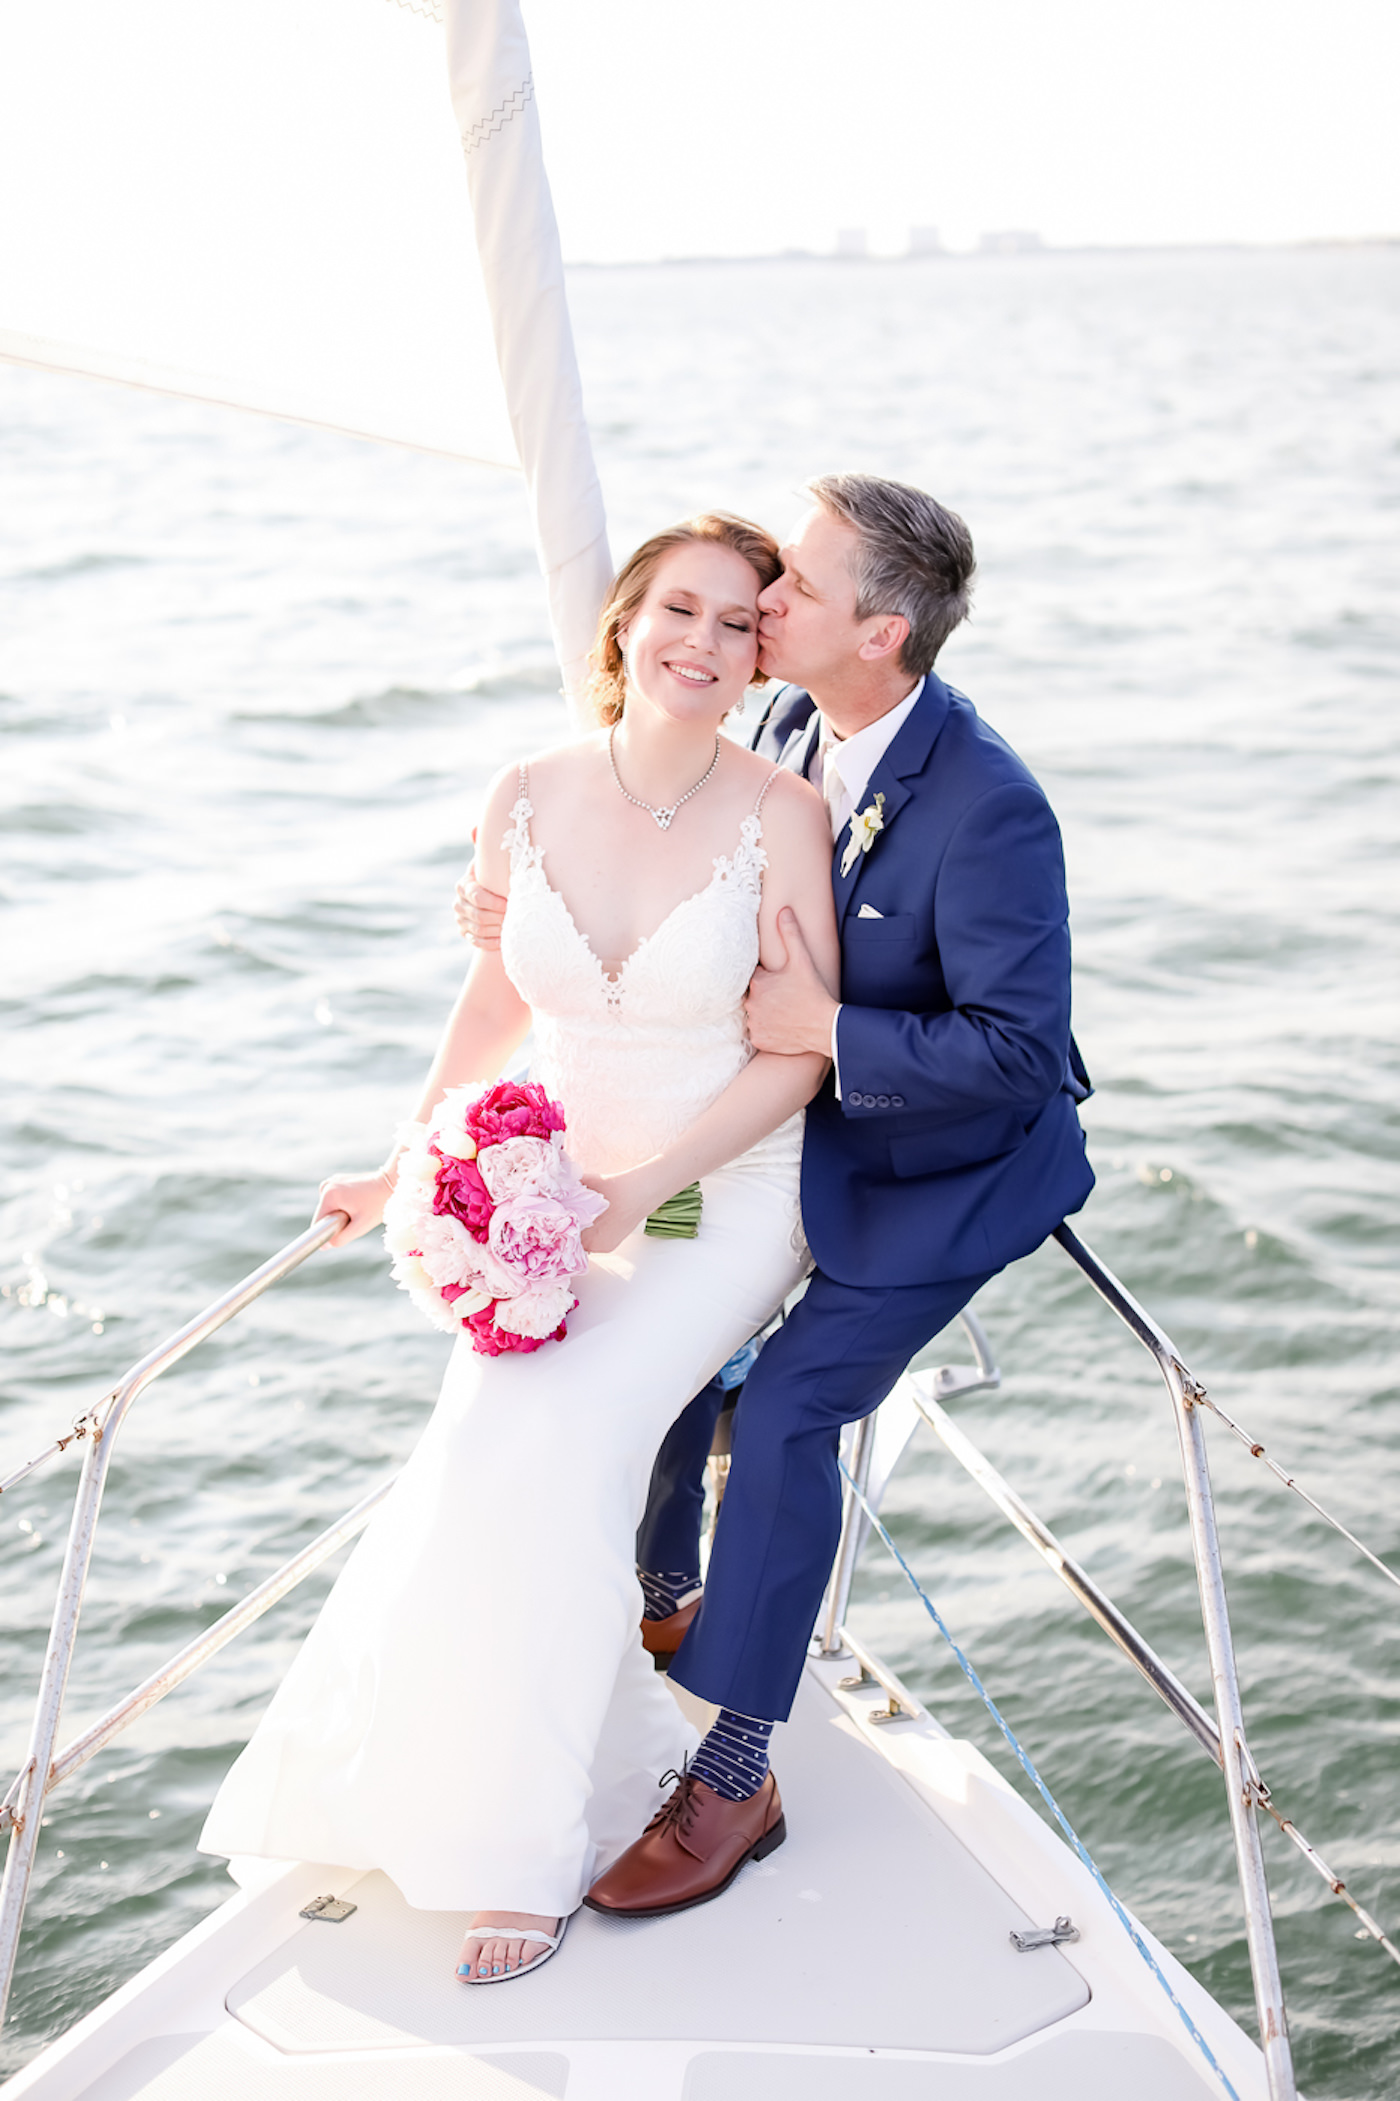 Romantic Bride and Groom on Yacht Wedding Portrait, Bride in Fitted Lace, V Neckline with Thin Spaghetti Straps Stella York Wedding Dress Hold Fuschia and Blush Pink Floral Bouquet, Groom in Blue Suit | Tampa Bay Wedding Photographer Lifelong Photography Studios | Wedding Hair and Makeup Michele Renee the Studio